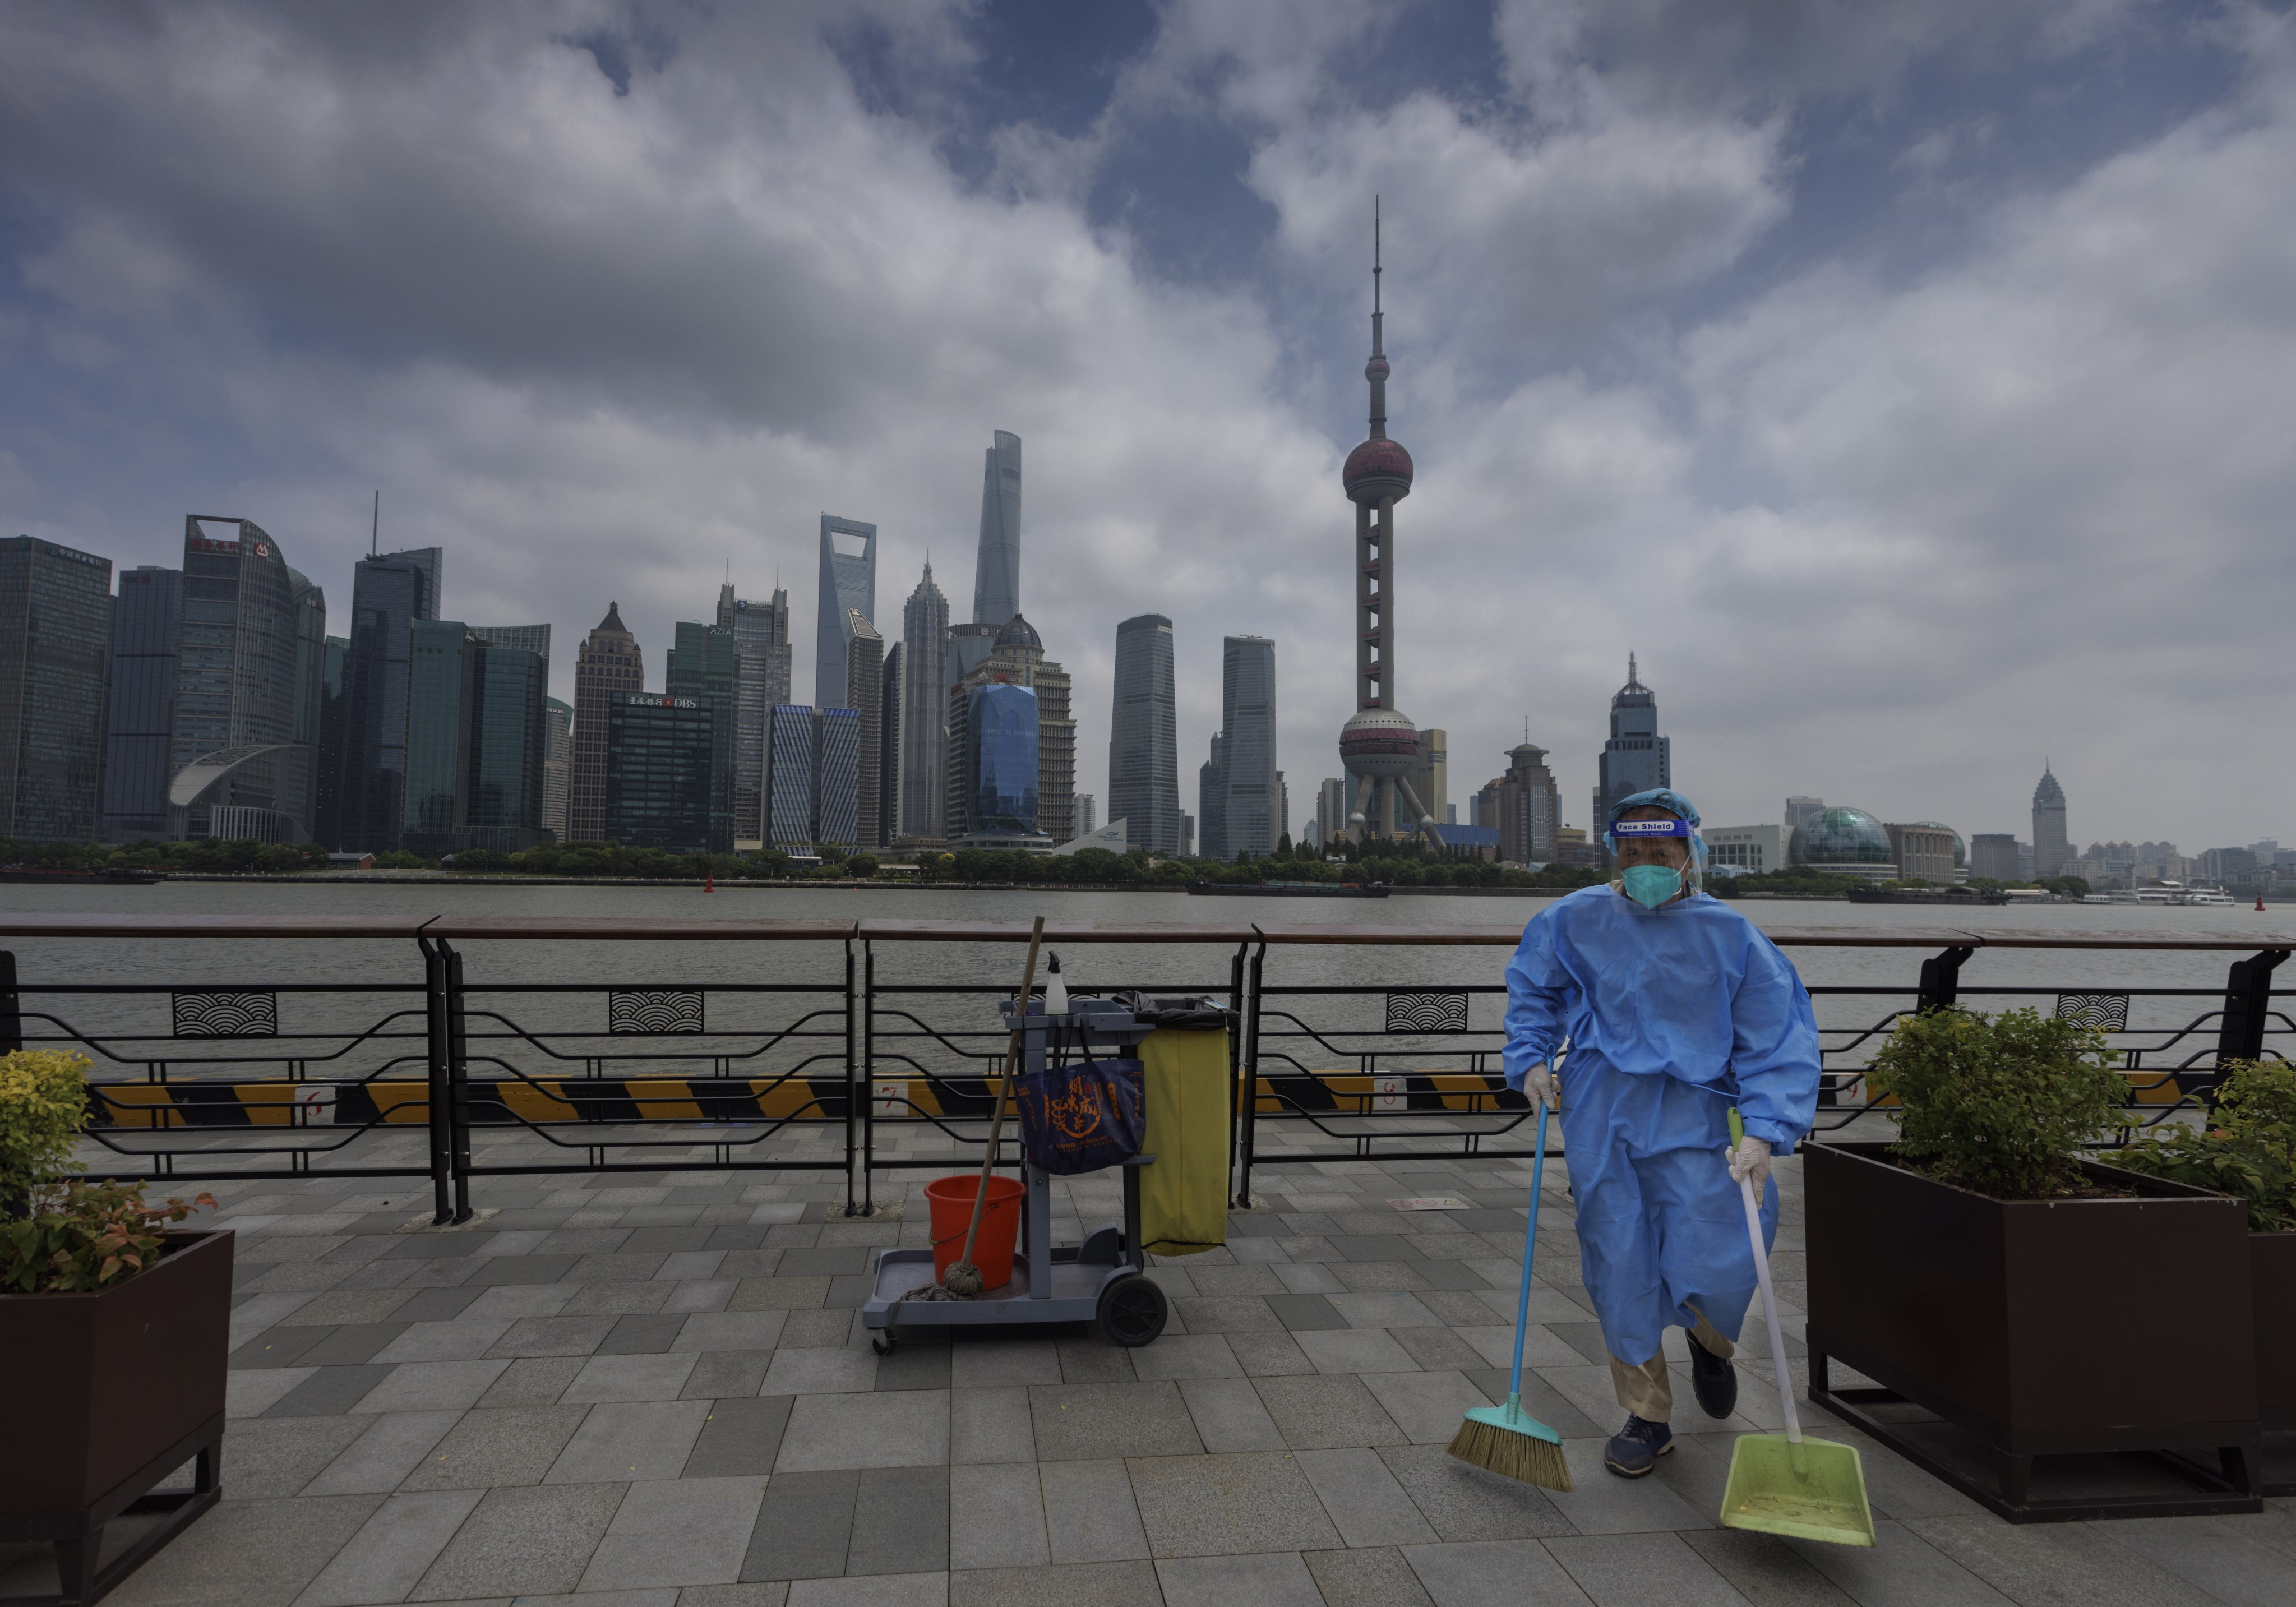 China’s zero-Covid policy, which has included lockdowns in Shanghai (pictured), is “straining the economic political and social fabric of the country”, according to a new report. Photo: EPA-EFE